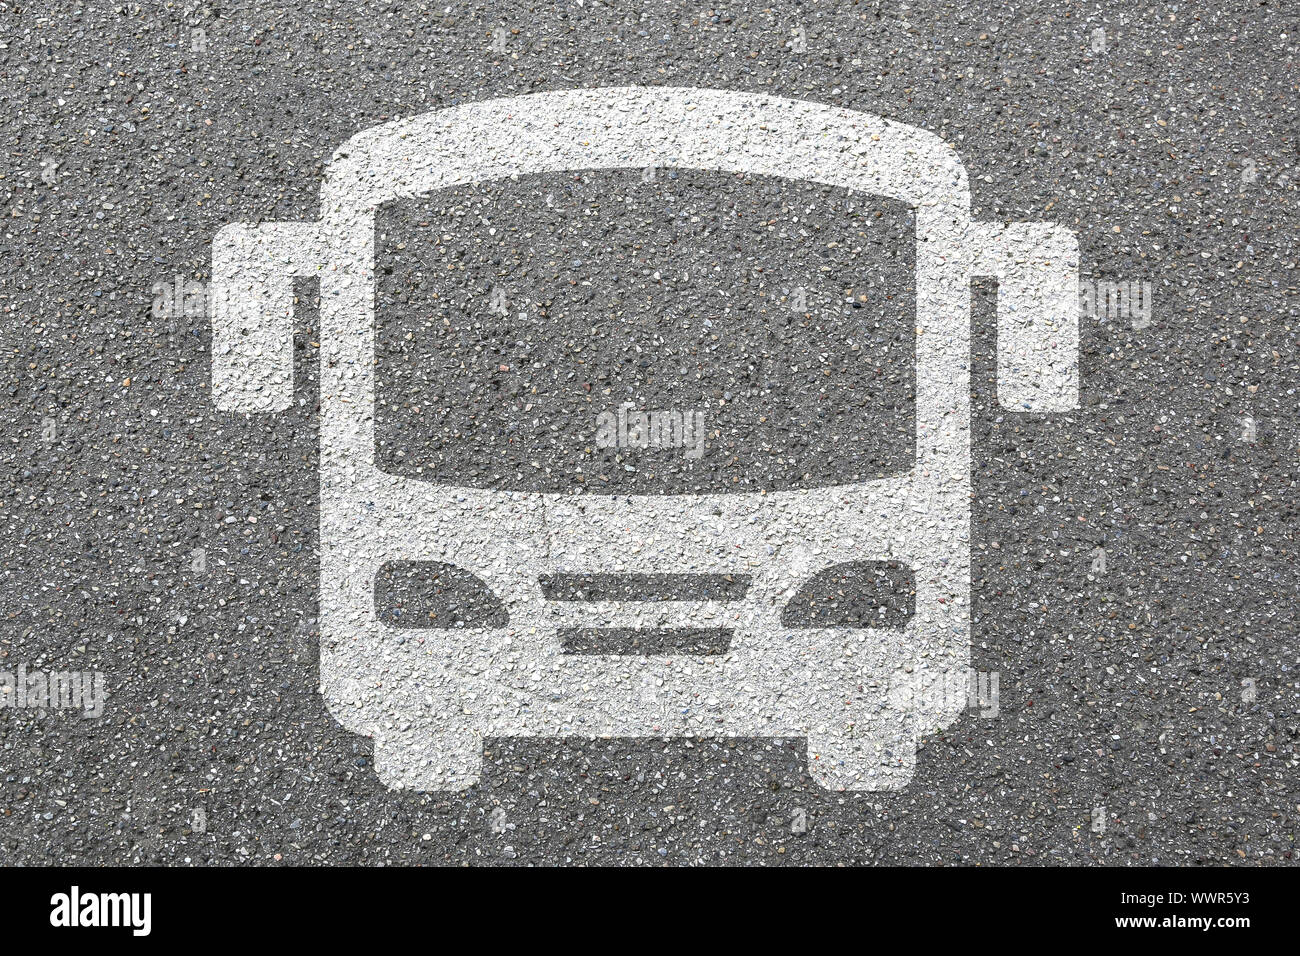 bus bus bus long distance bus street traffic city mobility Stock Photo